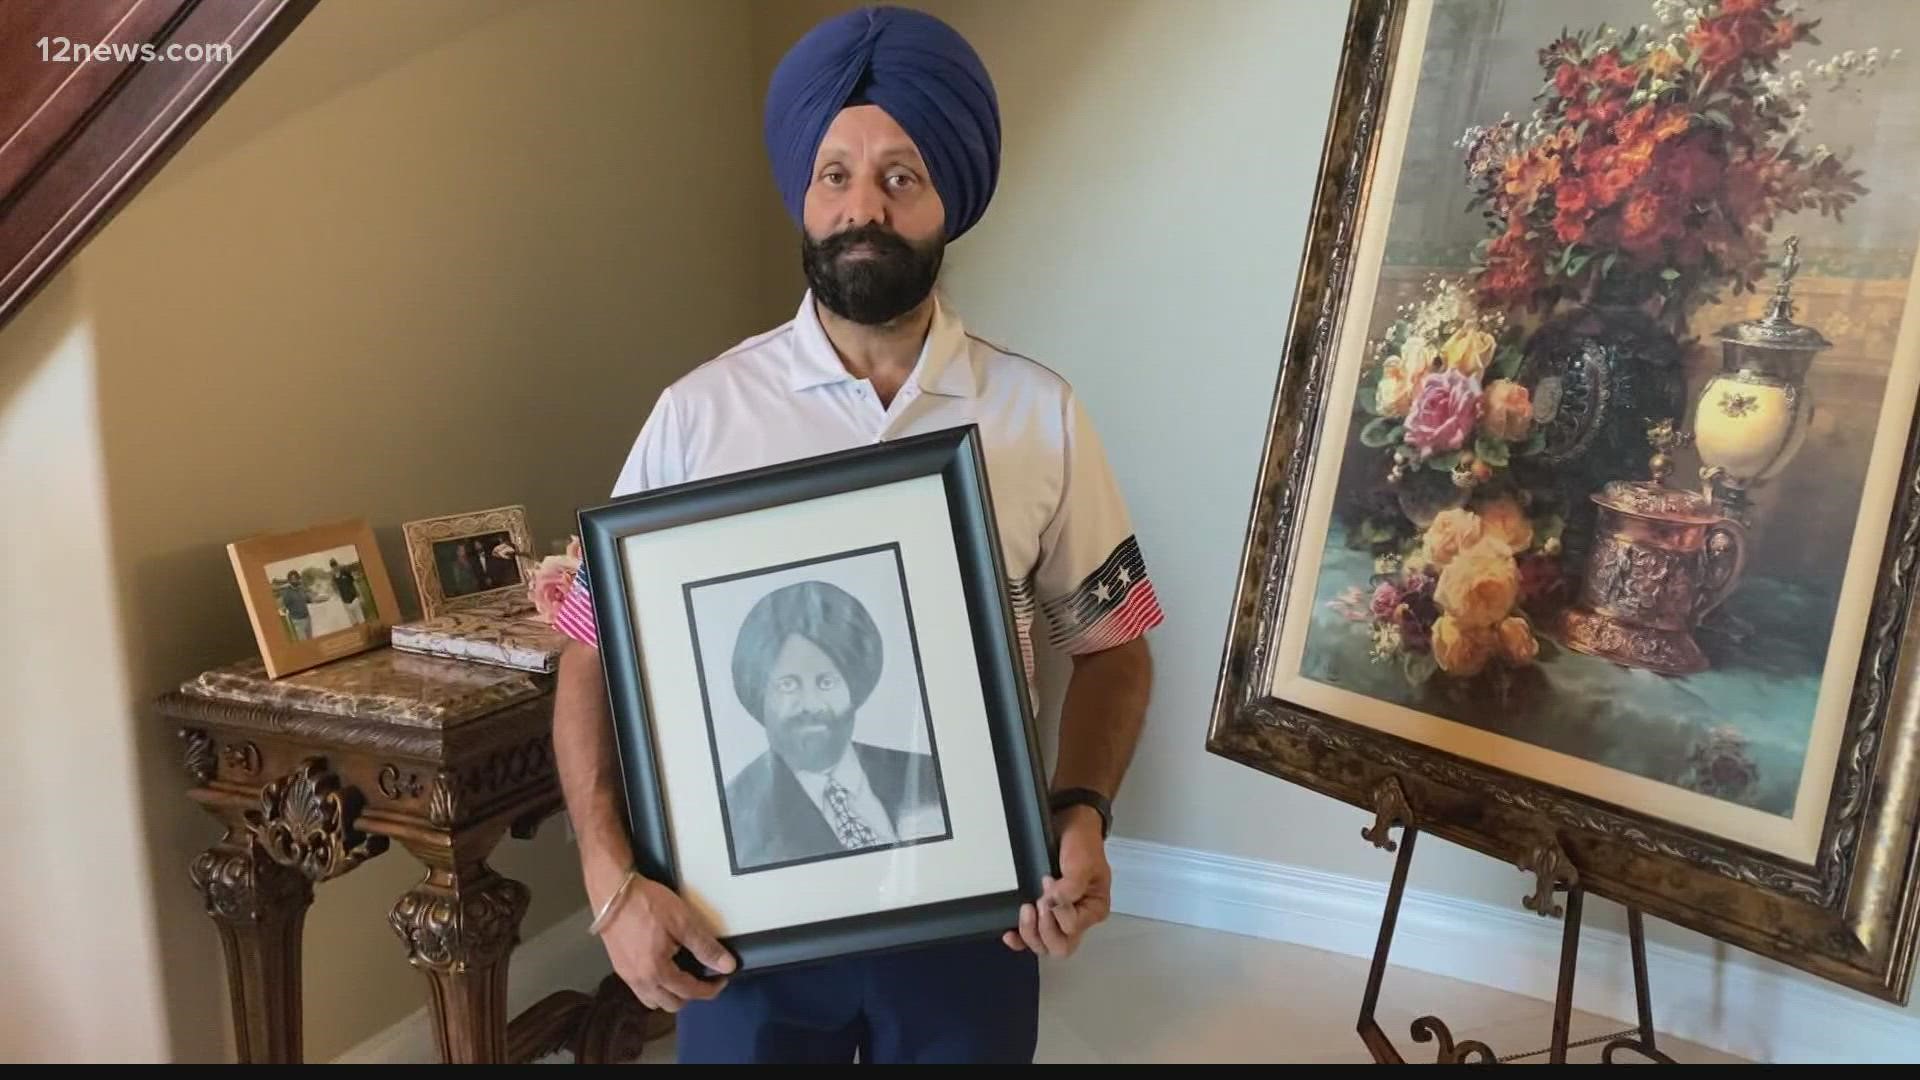 Rana Sodhi's brother was murdered days after 9/11 after a man said he was looking to kill a Muslim. Balbir Sodhi was Sikh.